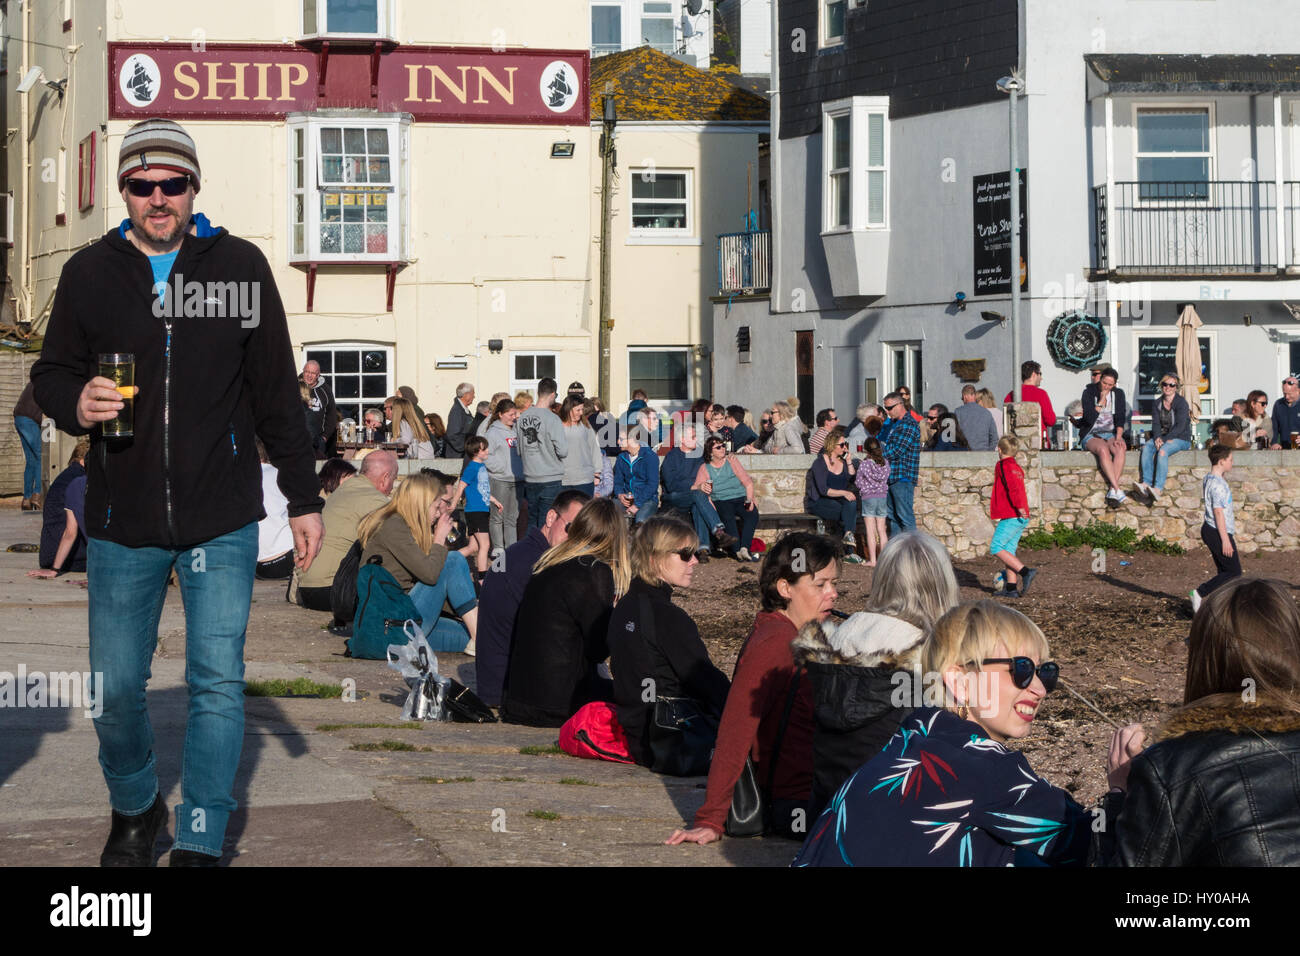 Crowds of people outside the Ship Inn, Teignmouth, Devon UK, enjoying evening sunshine and a drink. Stock Photo